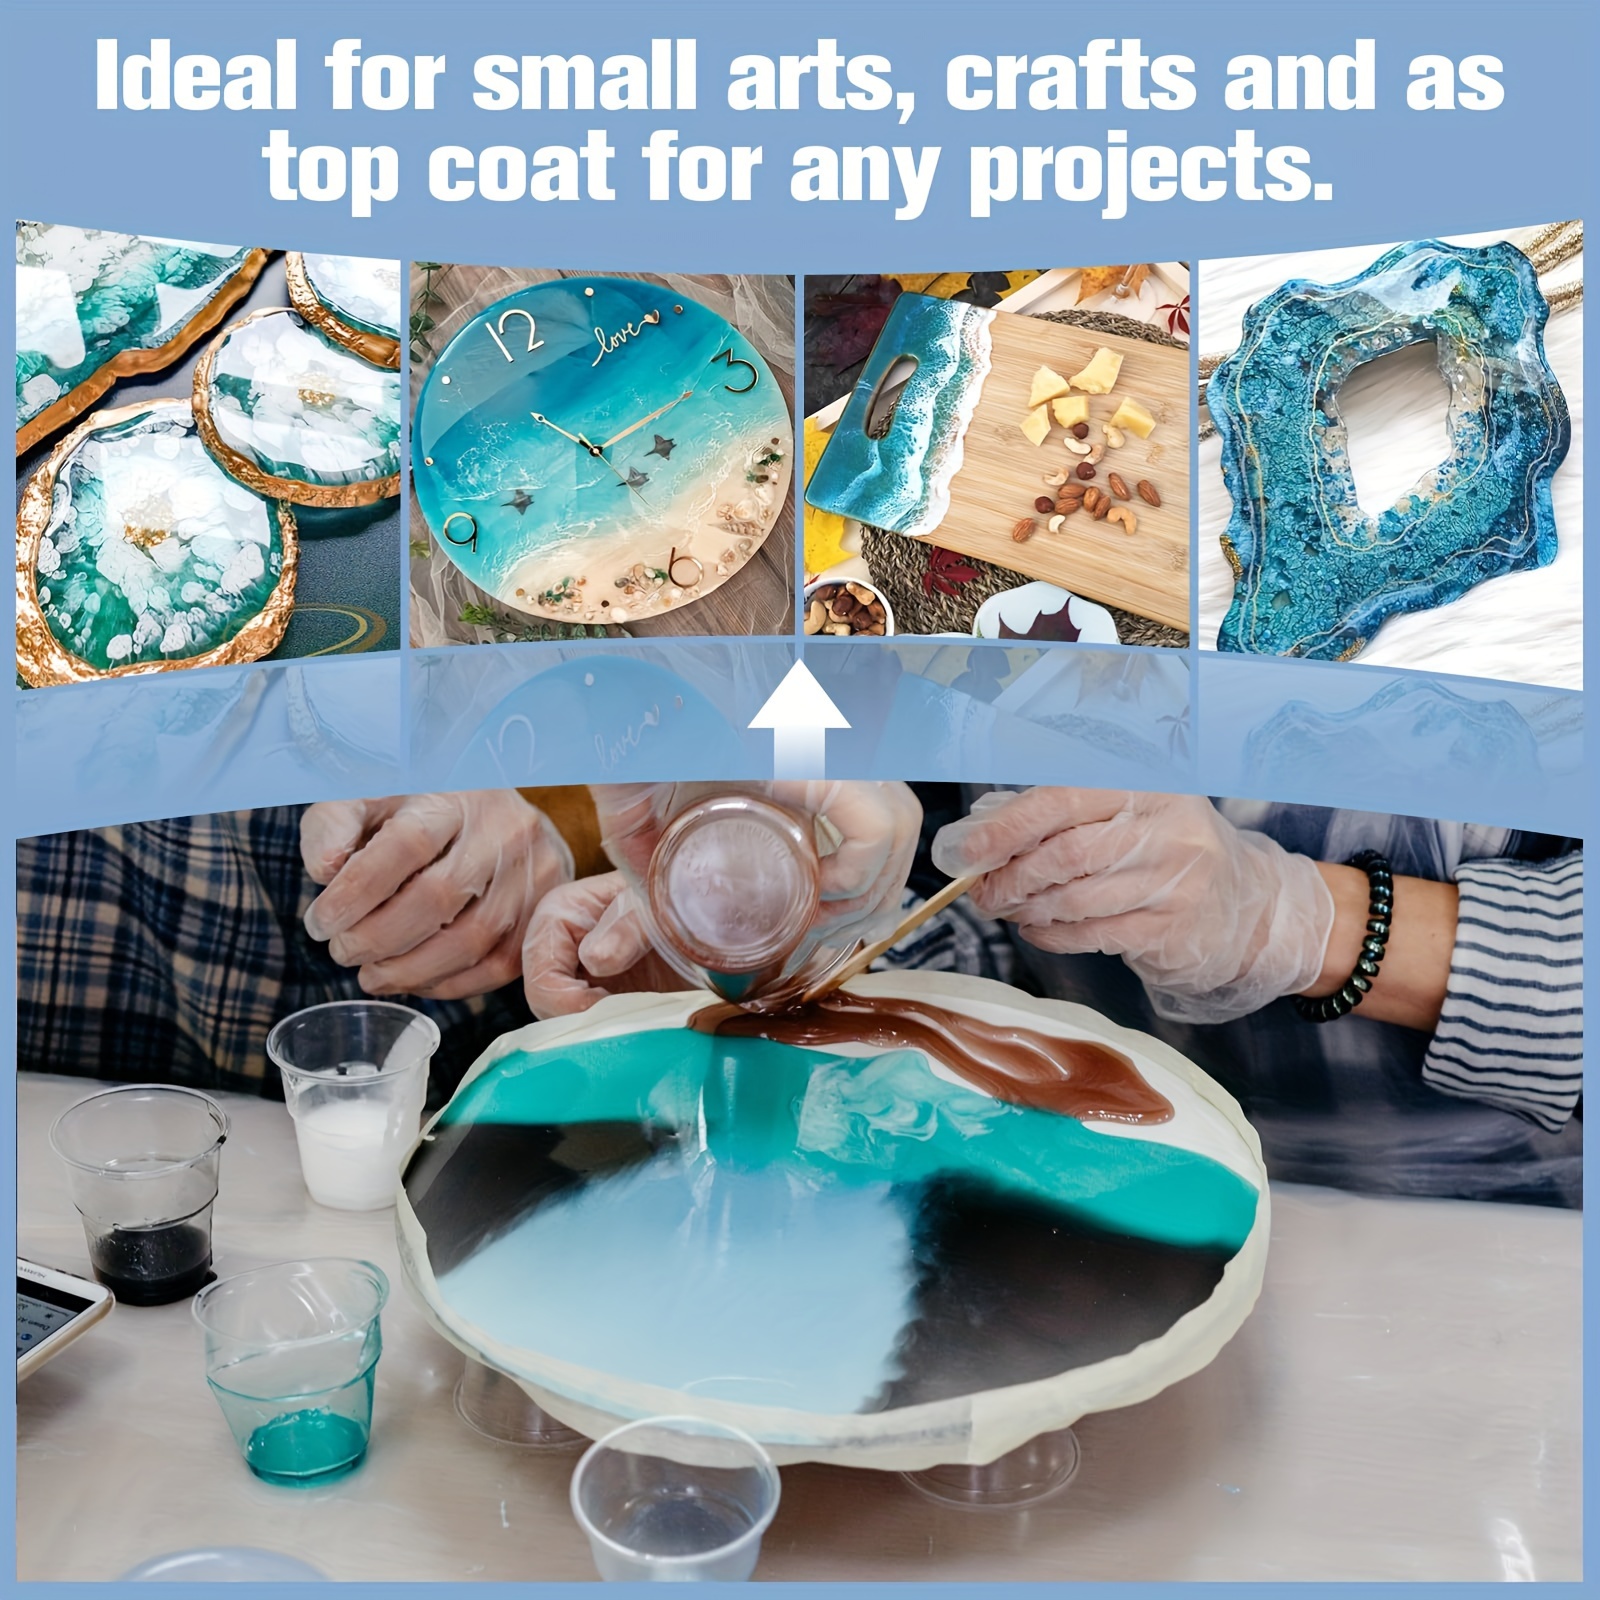 Tips and Tricks for Perfect DIY Epoxy Resin Molds – Upstart Epoxy